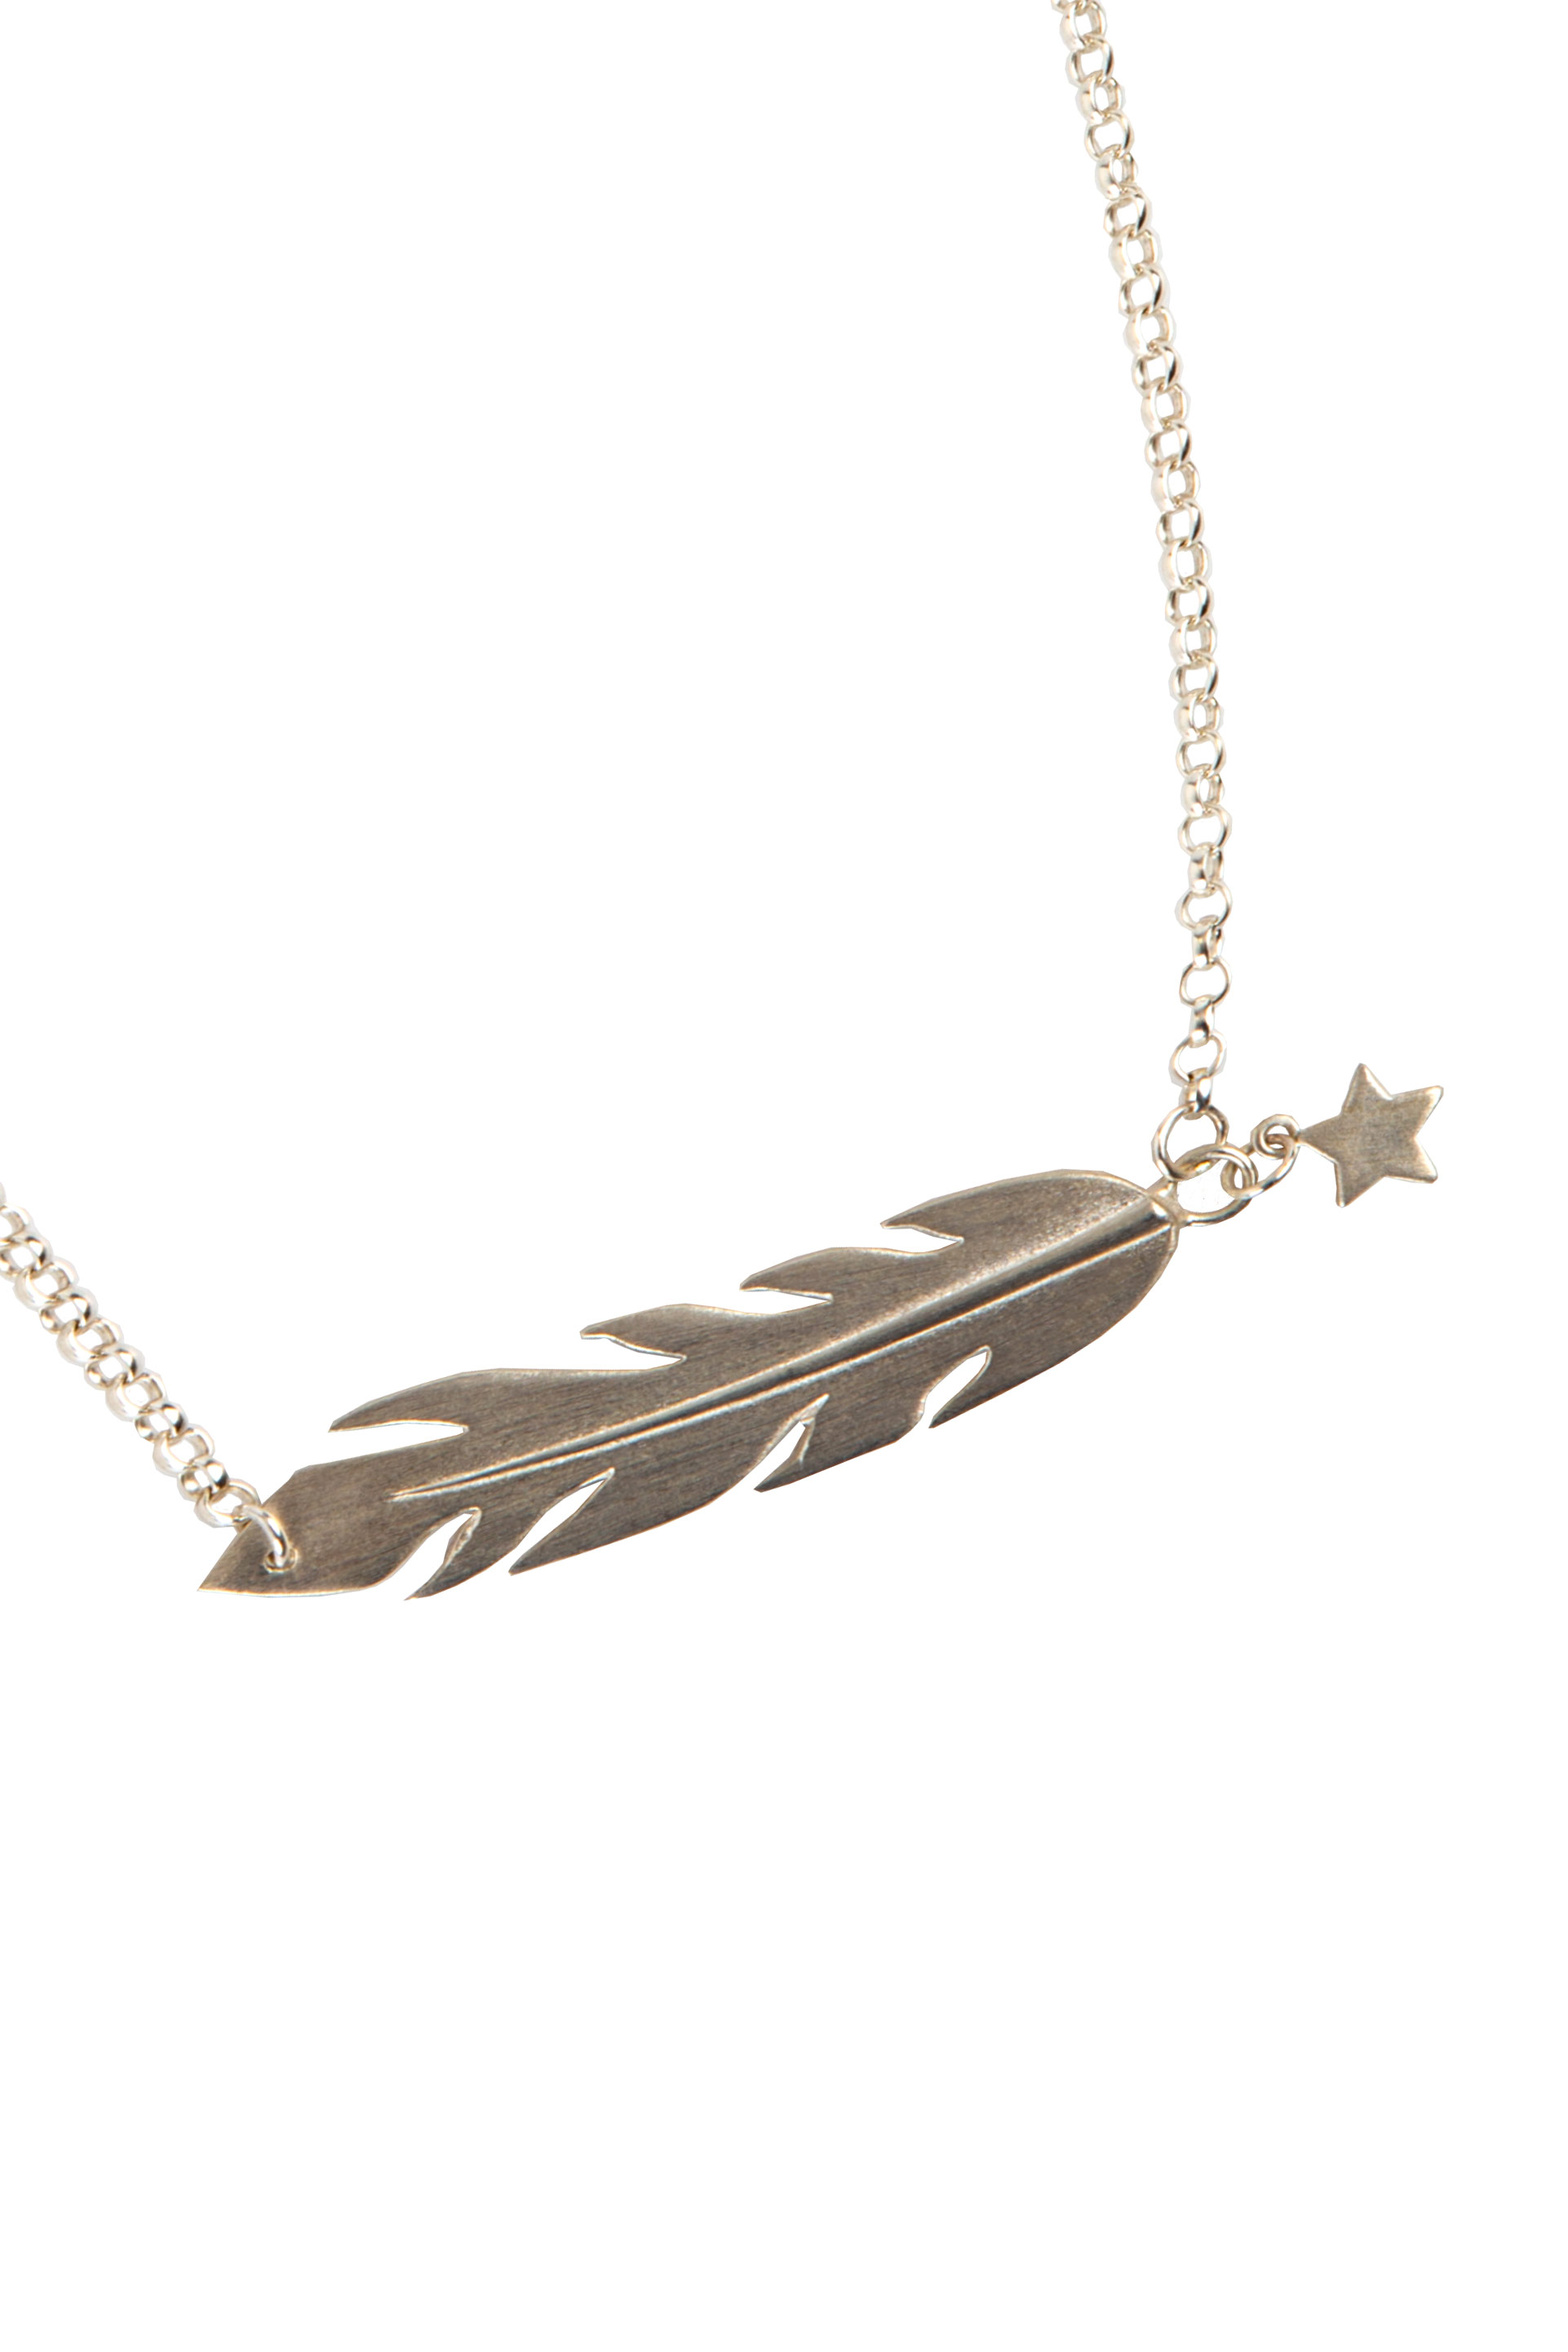 cb298_feather_necklace_silver_white_background.jpg